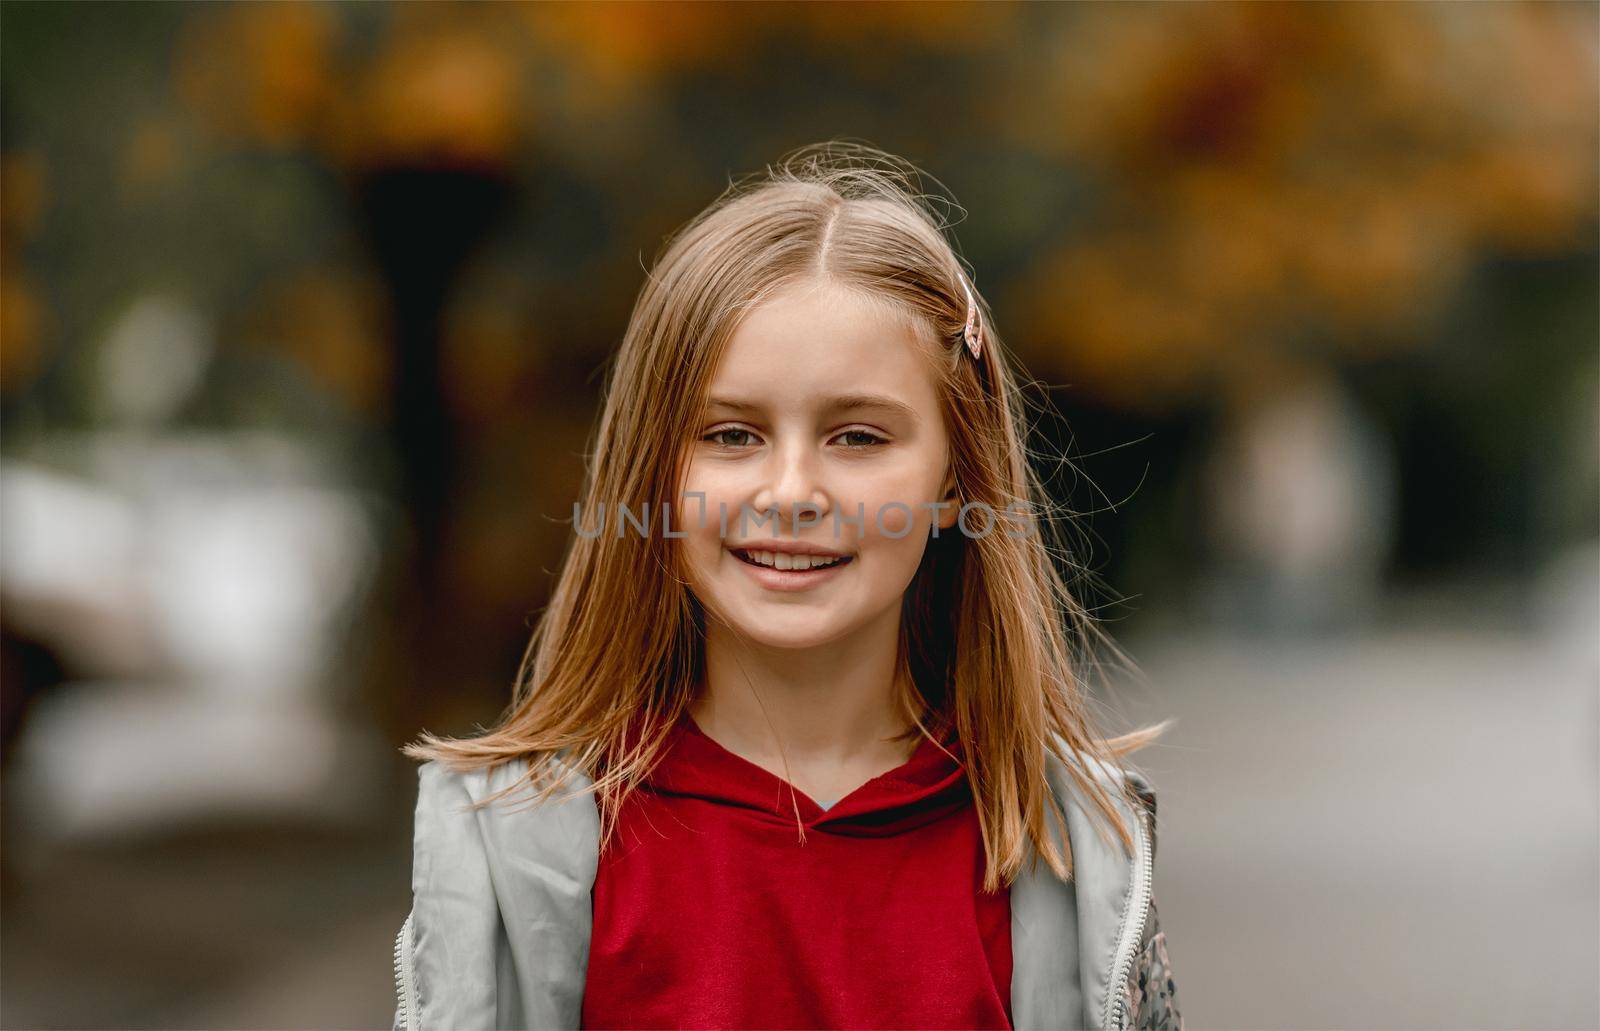 Preteen girl autumn portrait. Pretty kid smiling and looking at camera outdoors